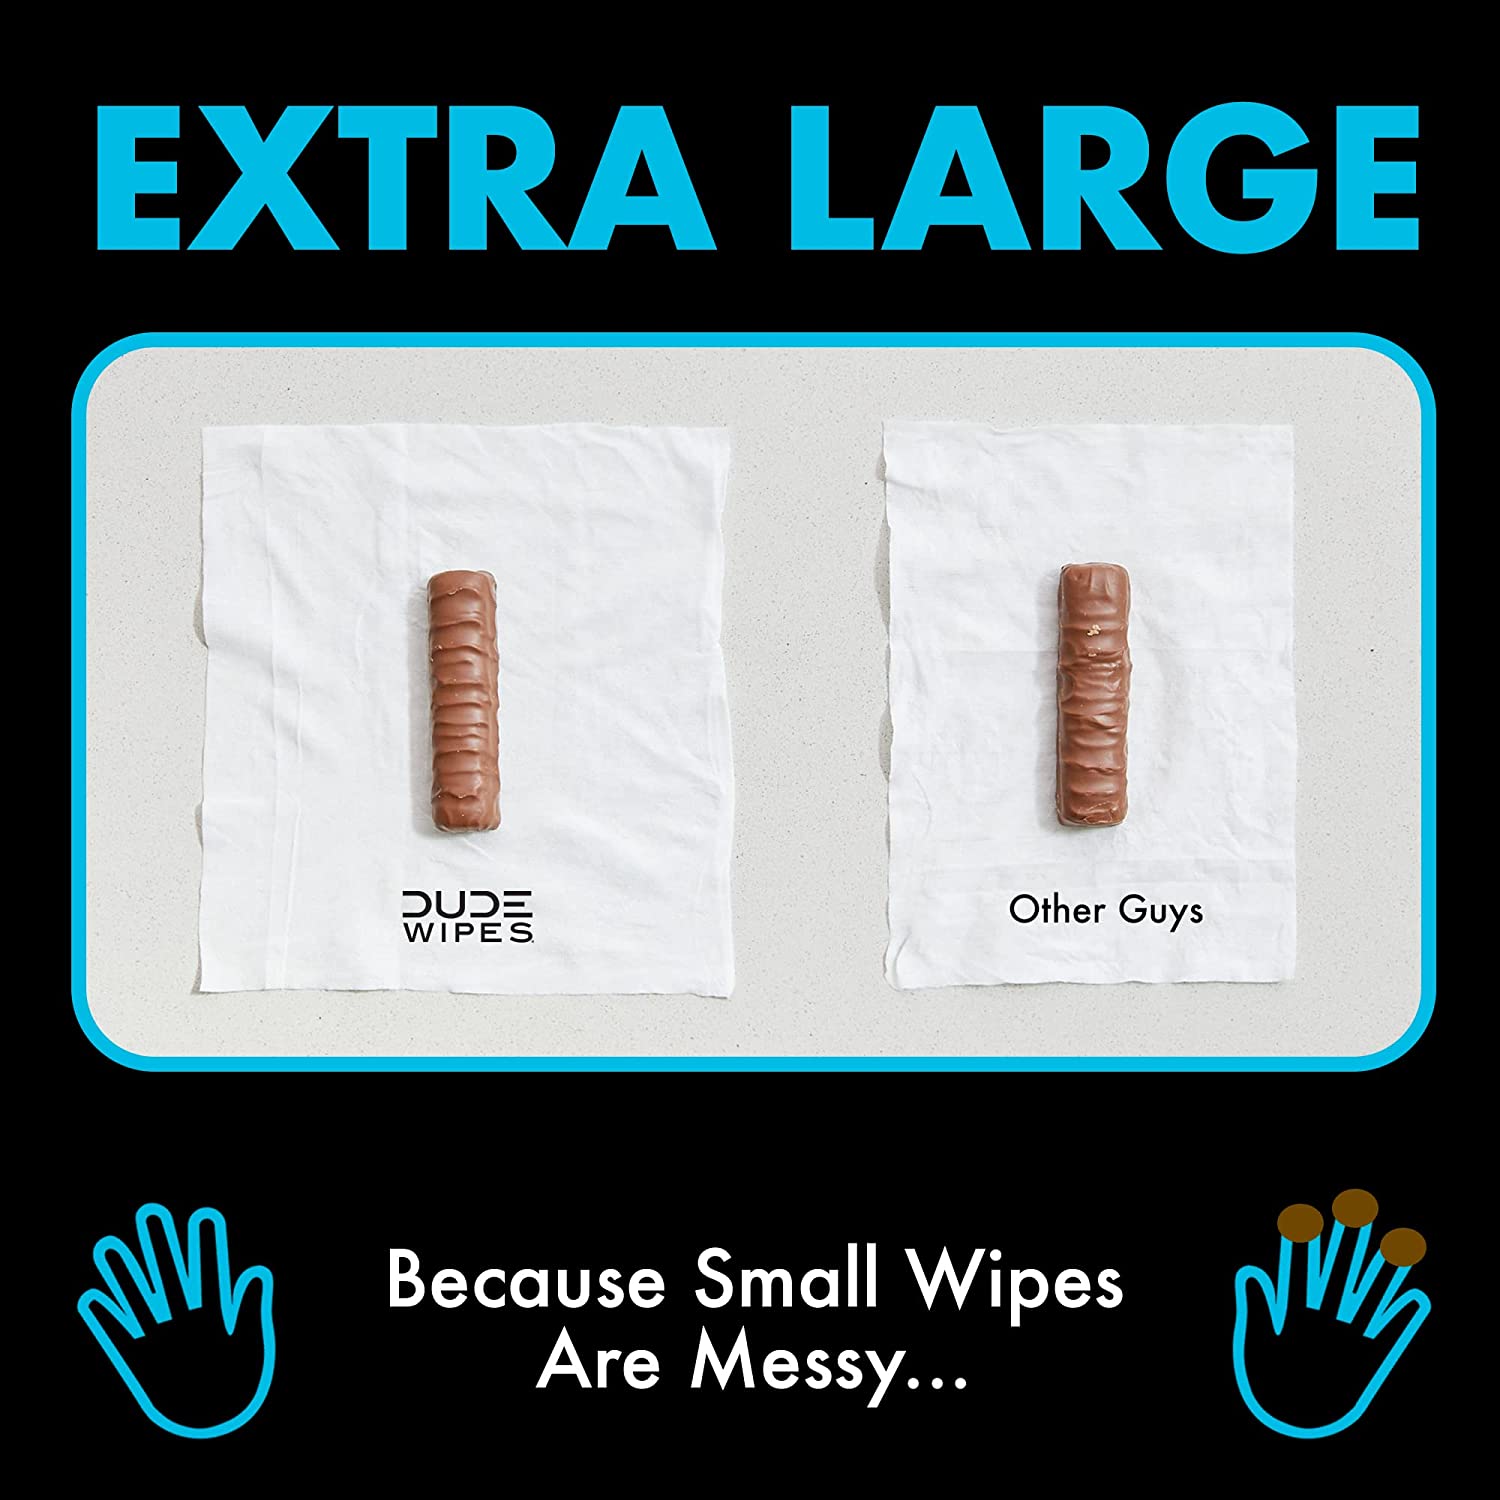 A comparison of a single dude wipe compared to another brand of wipes with a headline which reads, 'Extra Large.'